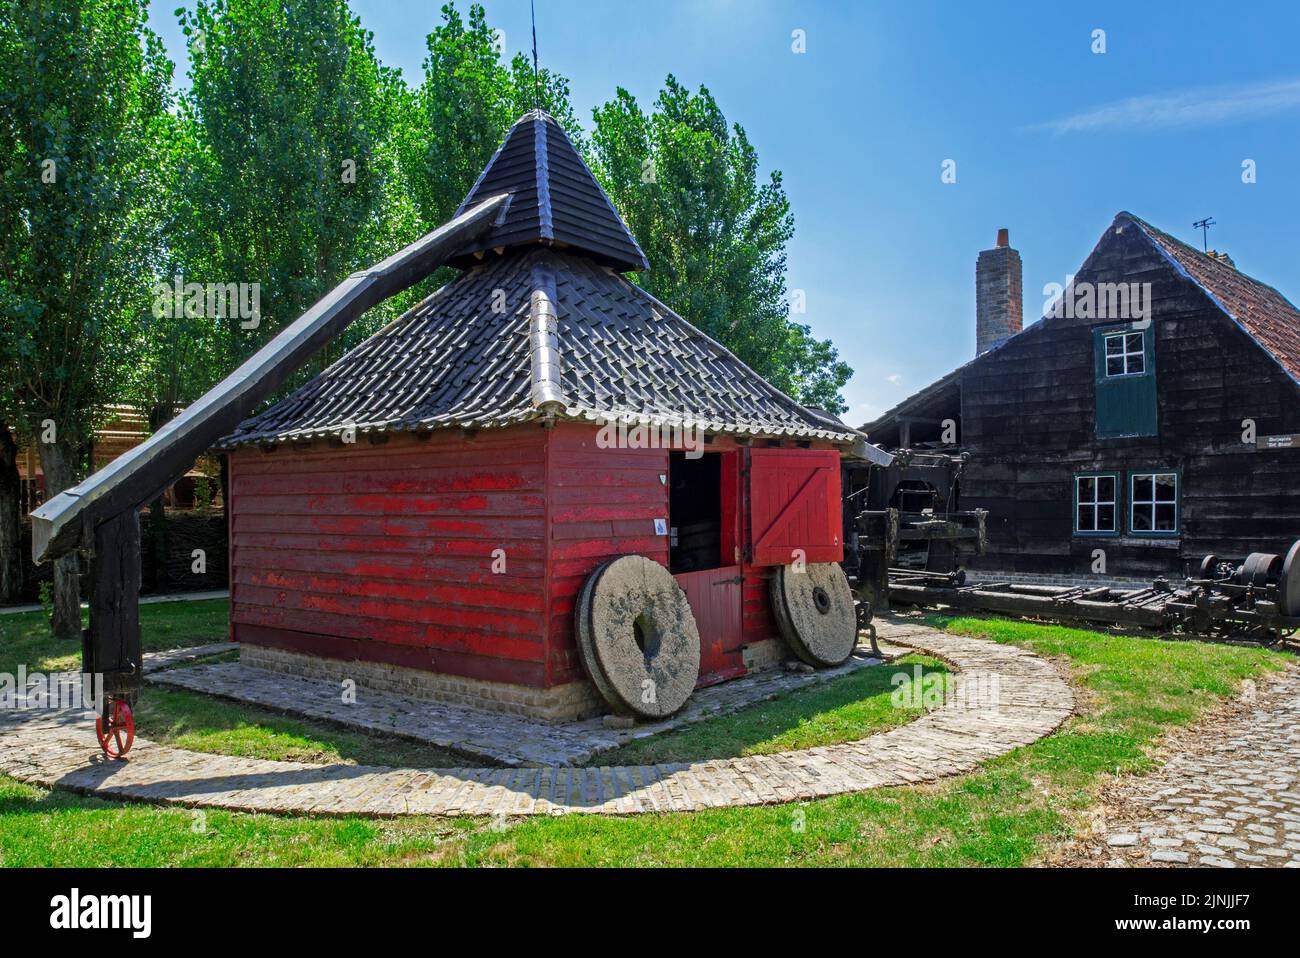 Old Flemish wooden horse mill which uses animal power for grinding grain at the open air museum Bachten de Kupe, Izenberge, West Flanders, Belgium Stock Photo